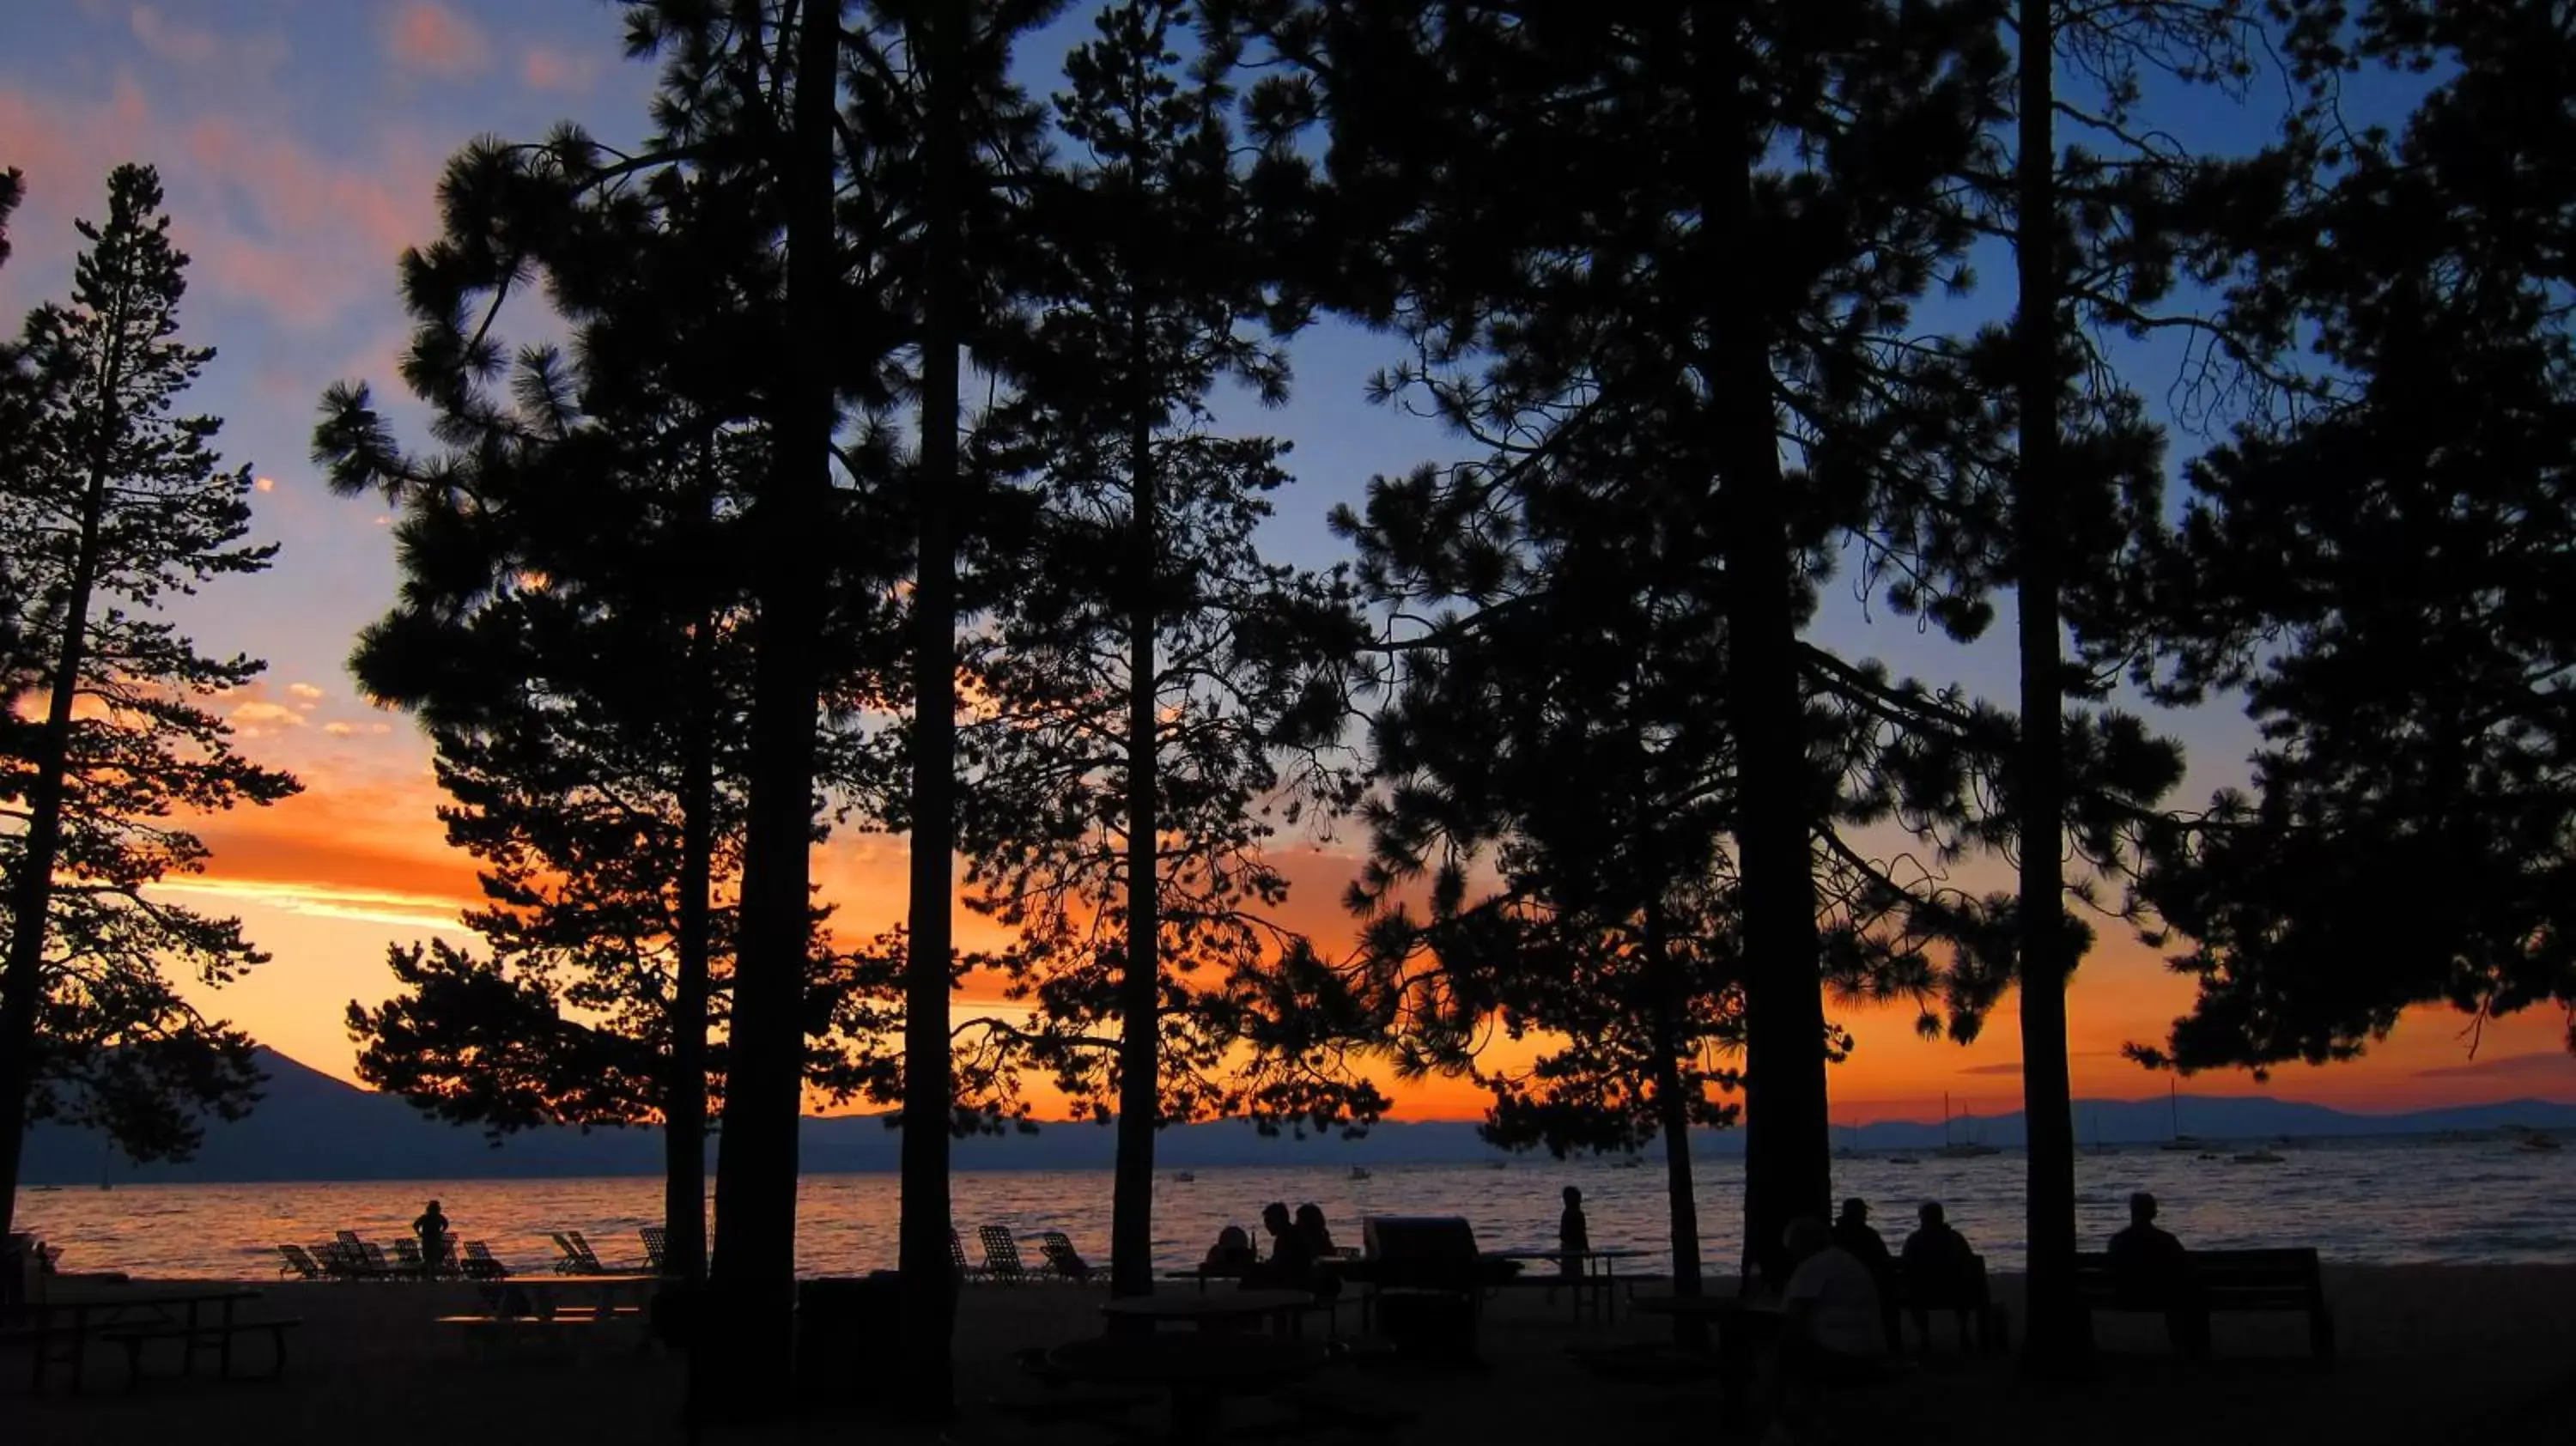 Area and facilities, Sunrise/Sunset in The Tahoe Beach & Ski Club Owners Association